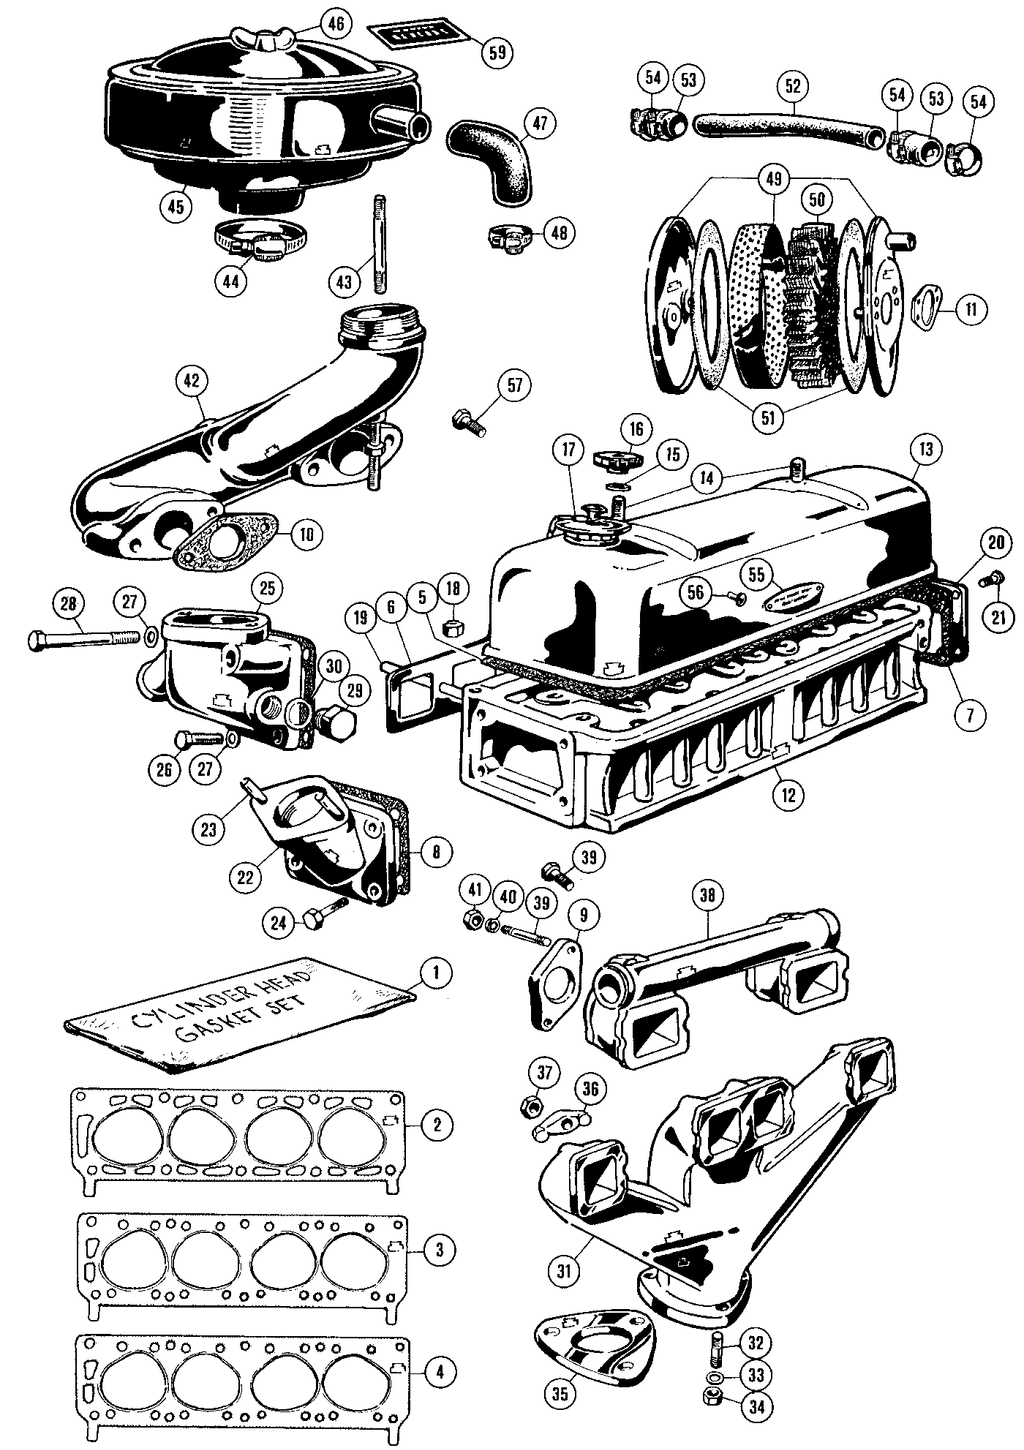 MGTD-TF 1949-1955 - Rocker covers | Webshop Anglo Parts - Cylinder head - 1